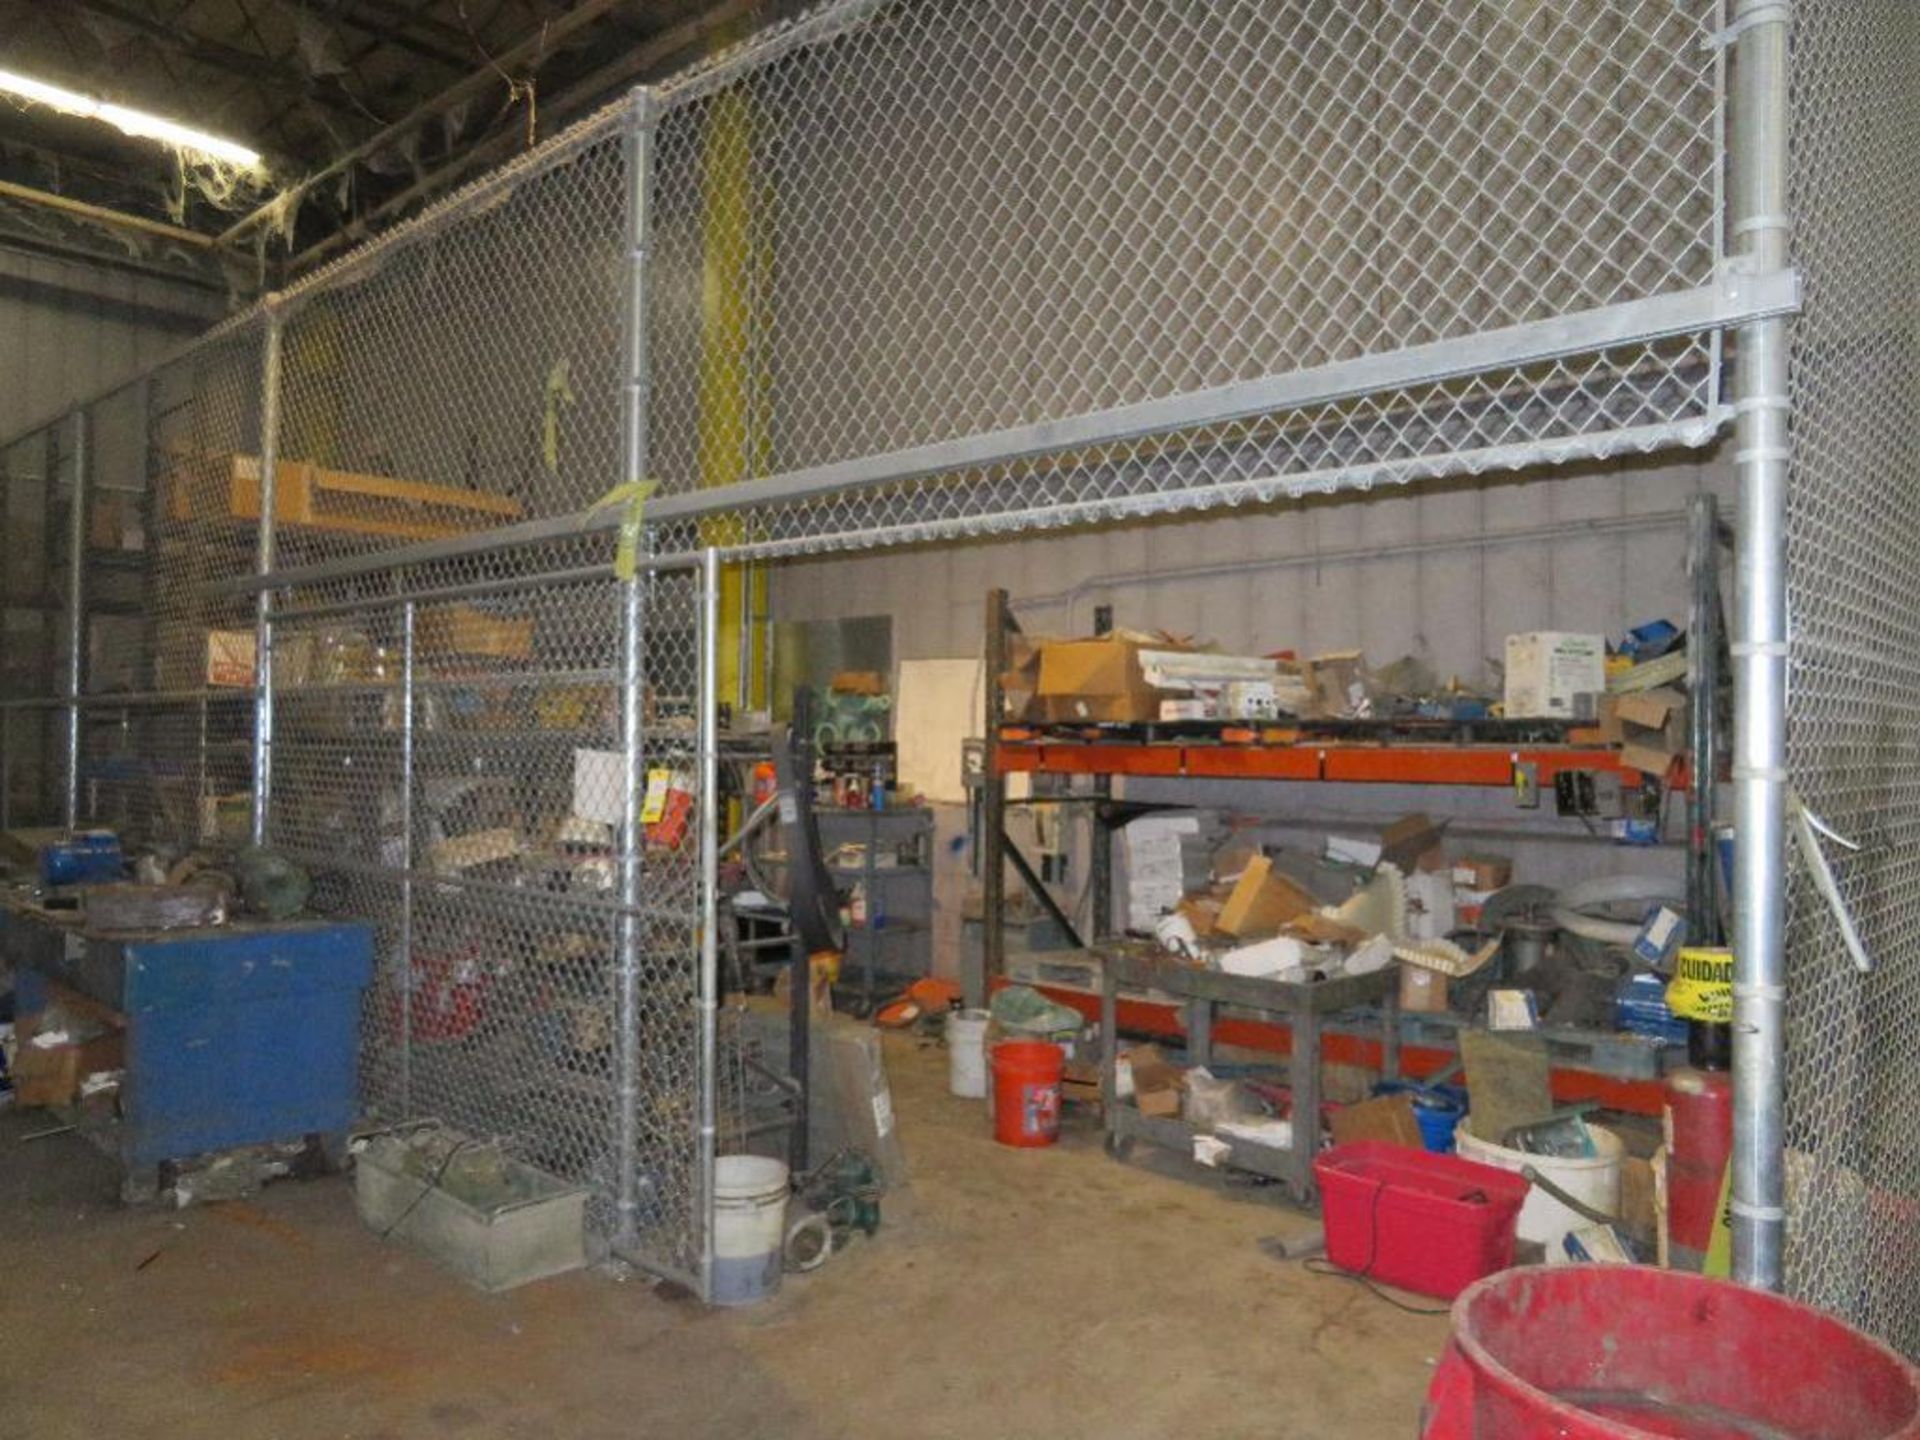 LOT: Contents of Maintenance Cage including: (6) Sections Pallet Rack & Assorted Electric Motors, Pu